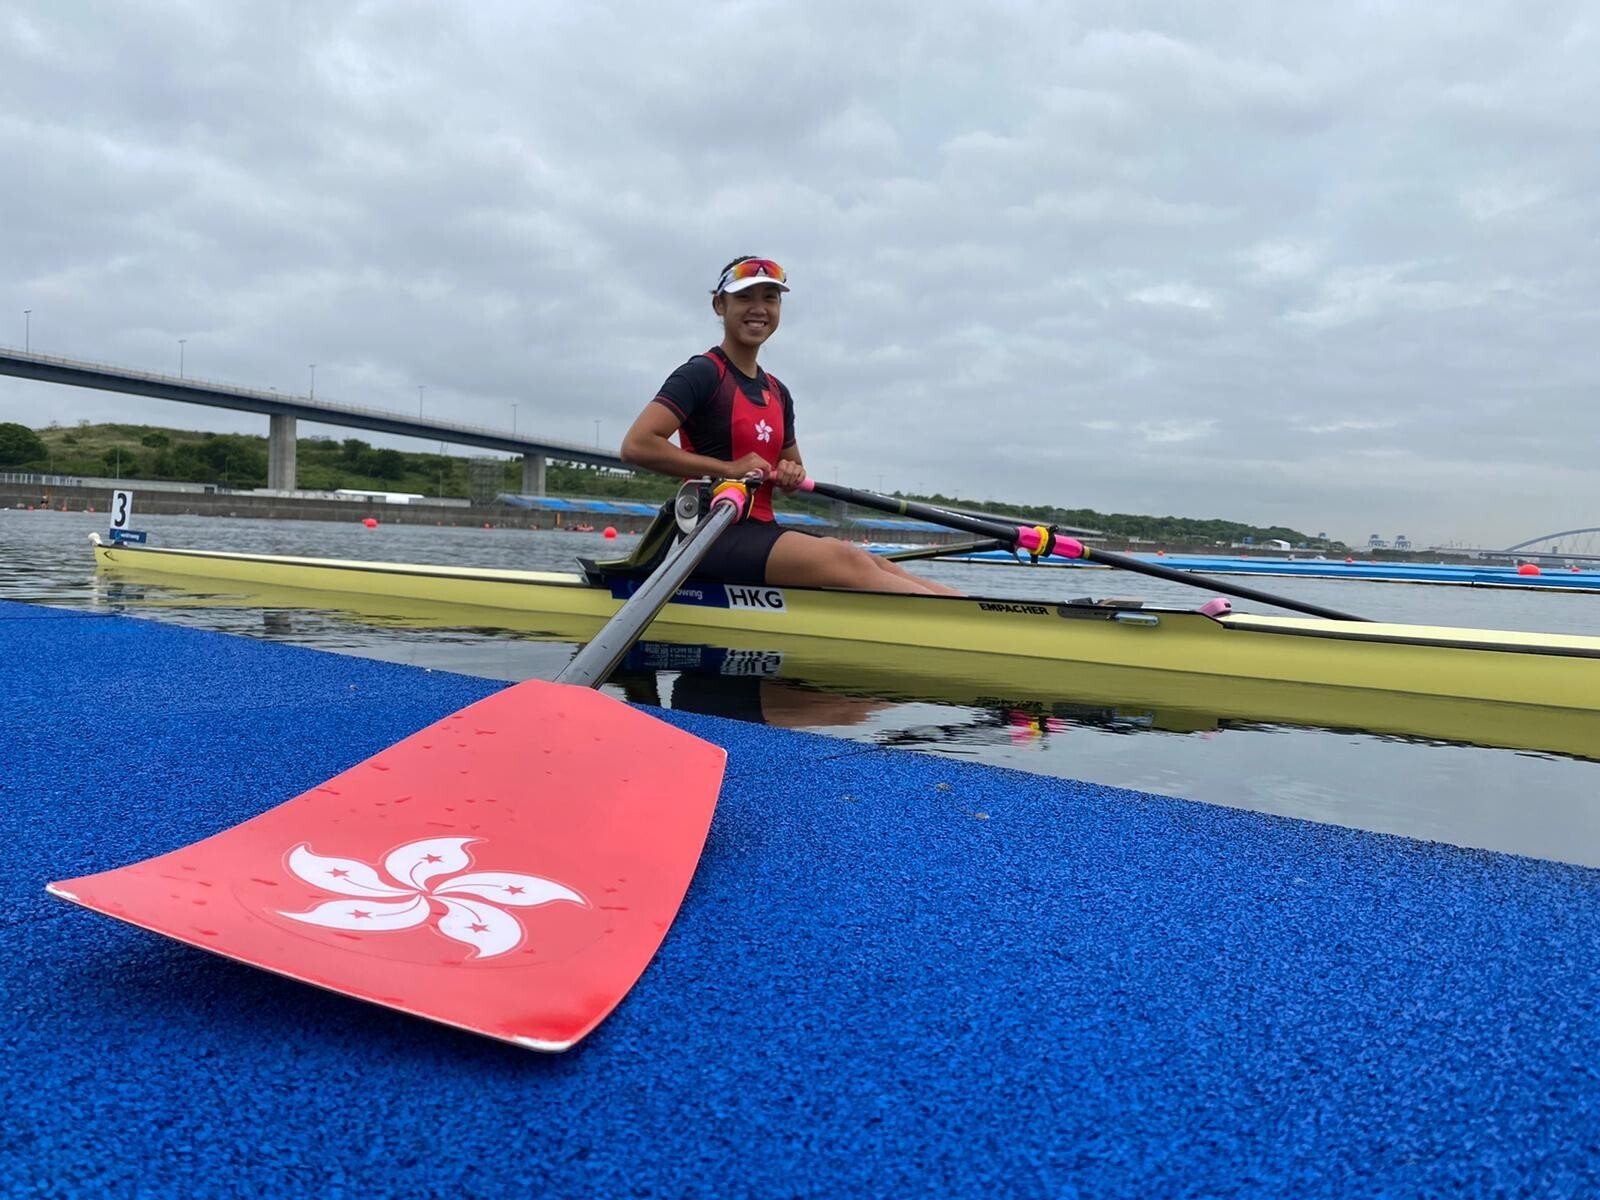 Winnie Hung in the women's single sculls at the Olympic qualifiers in Tokyo. Photo: Rowing Association of Hong Kong, China